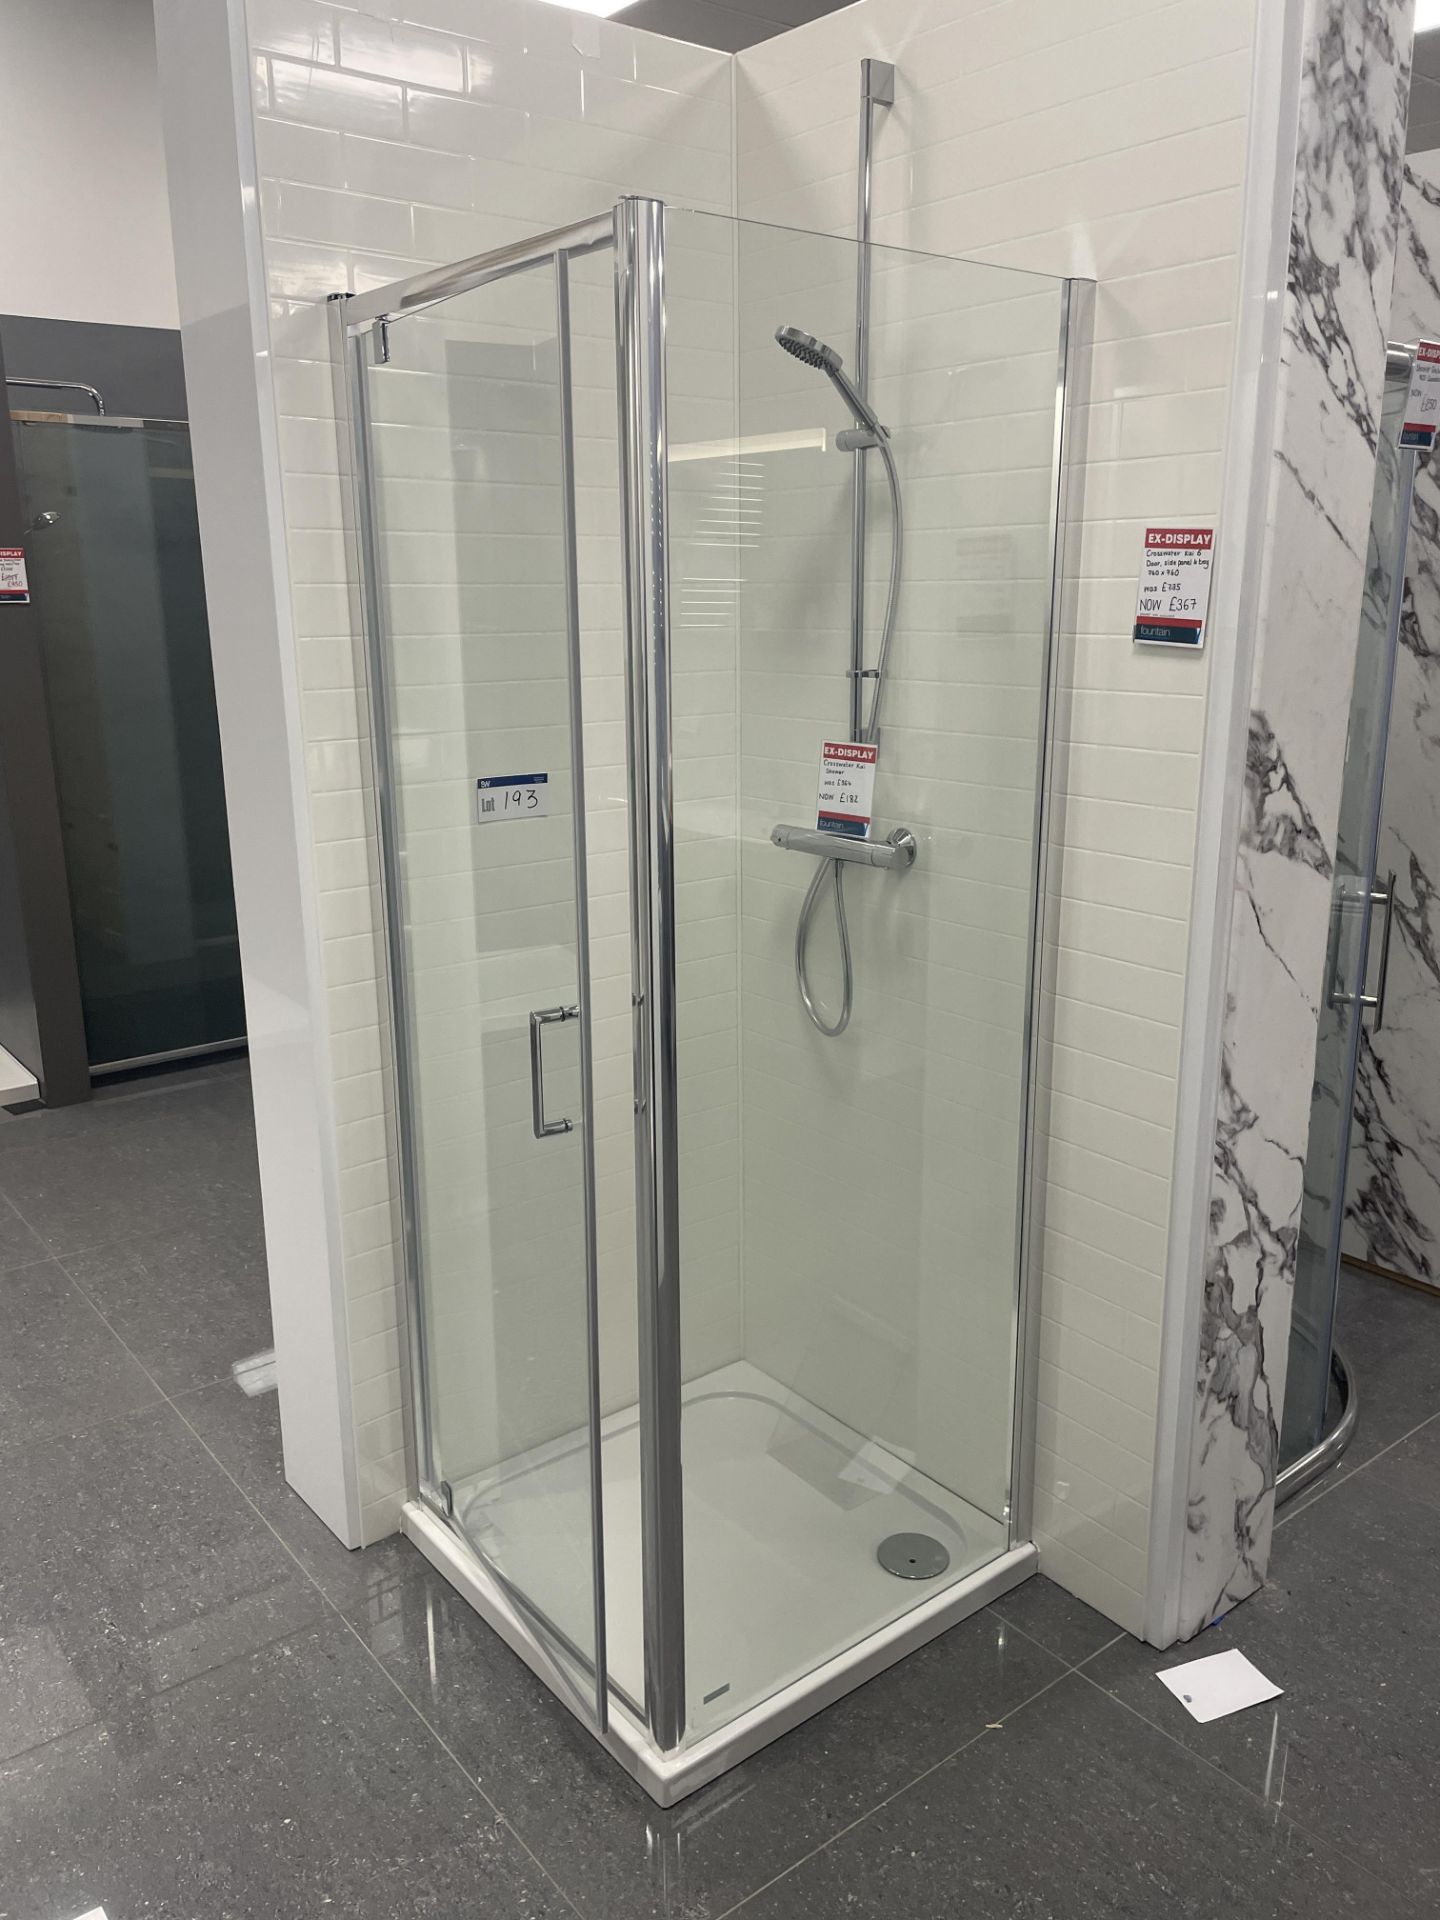 Crosswater Kai 6 Single Door Shower Enclosure, with flexible showerhead and mixer taps, approx.